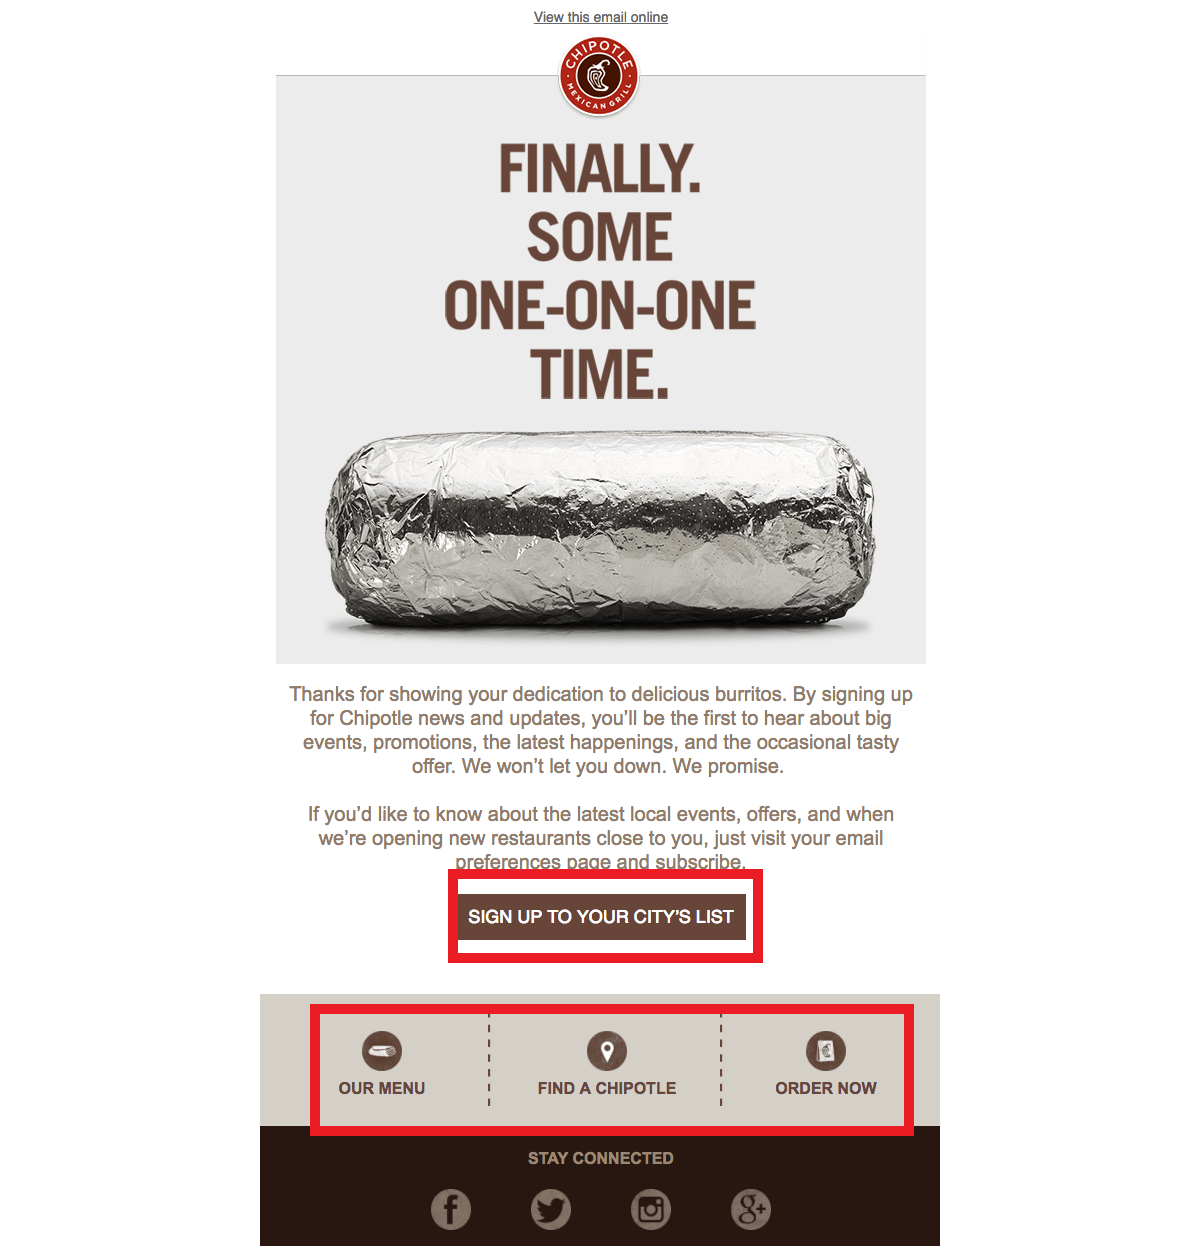 Chipotle sends the following 'Welcome Email' to customers who have just subscribed to the brand's news and updates feature